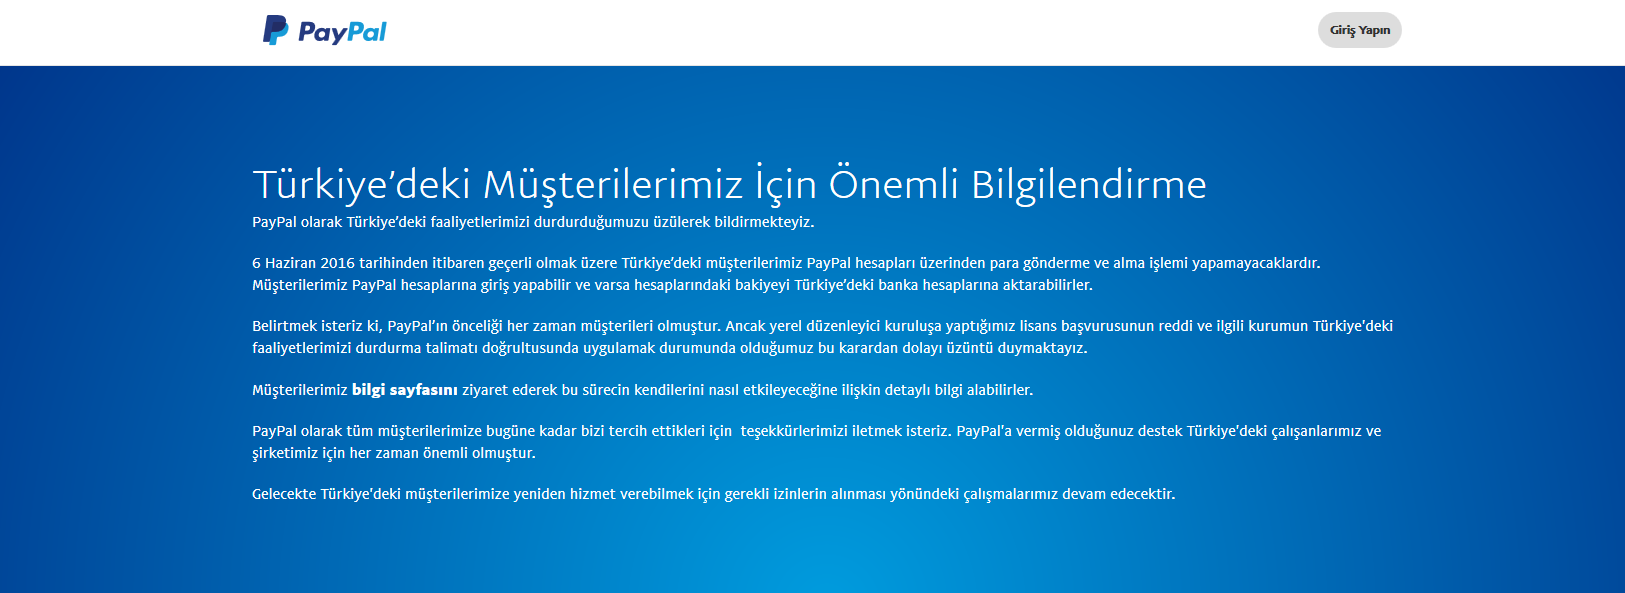 paypal-turkey.png